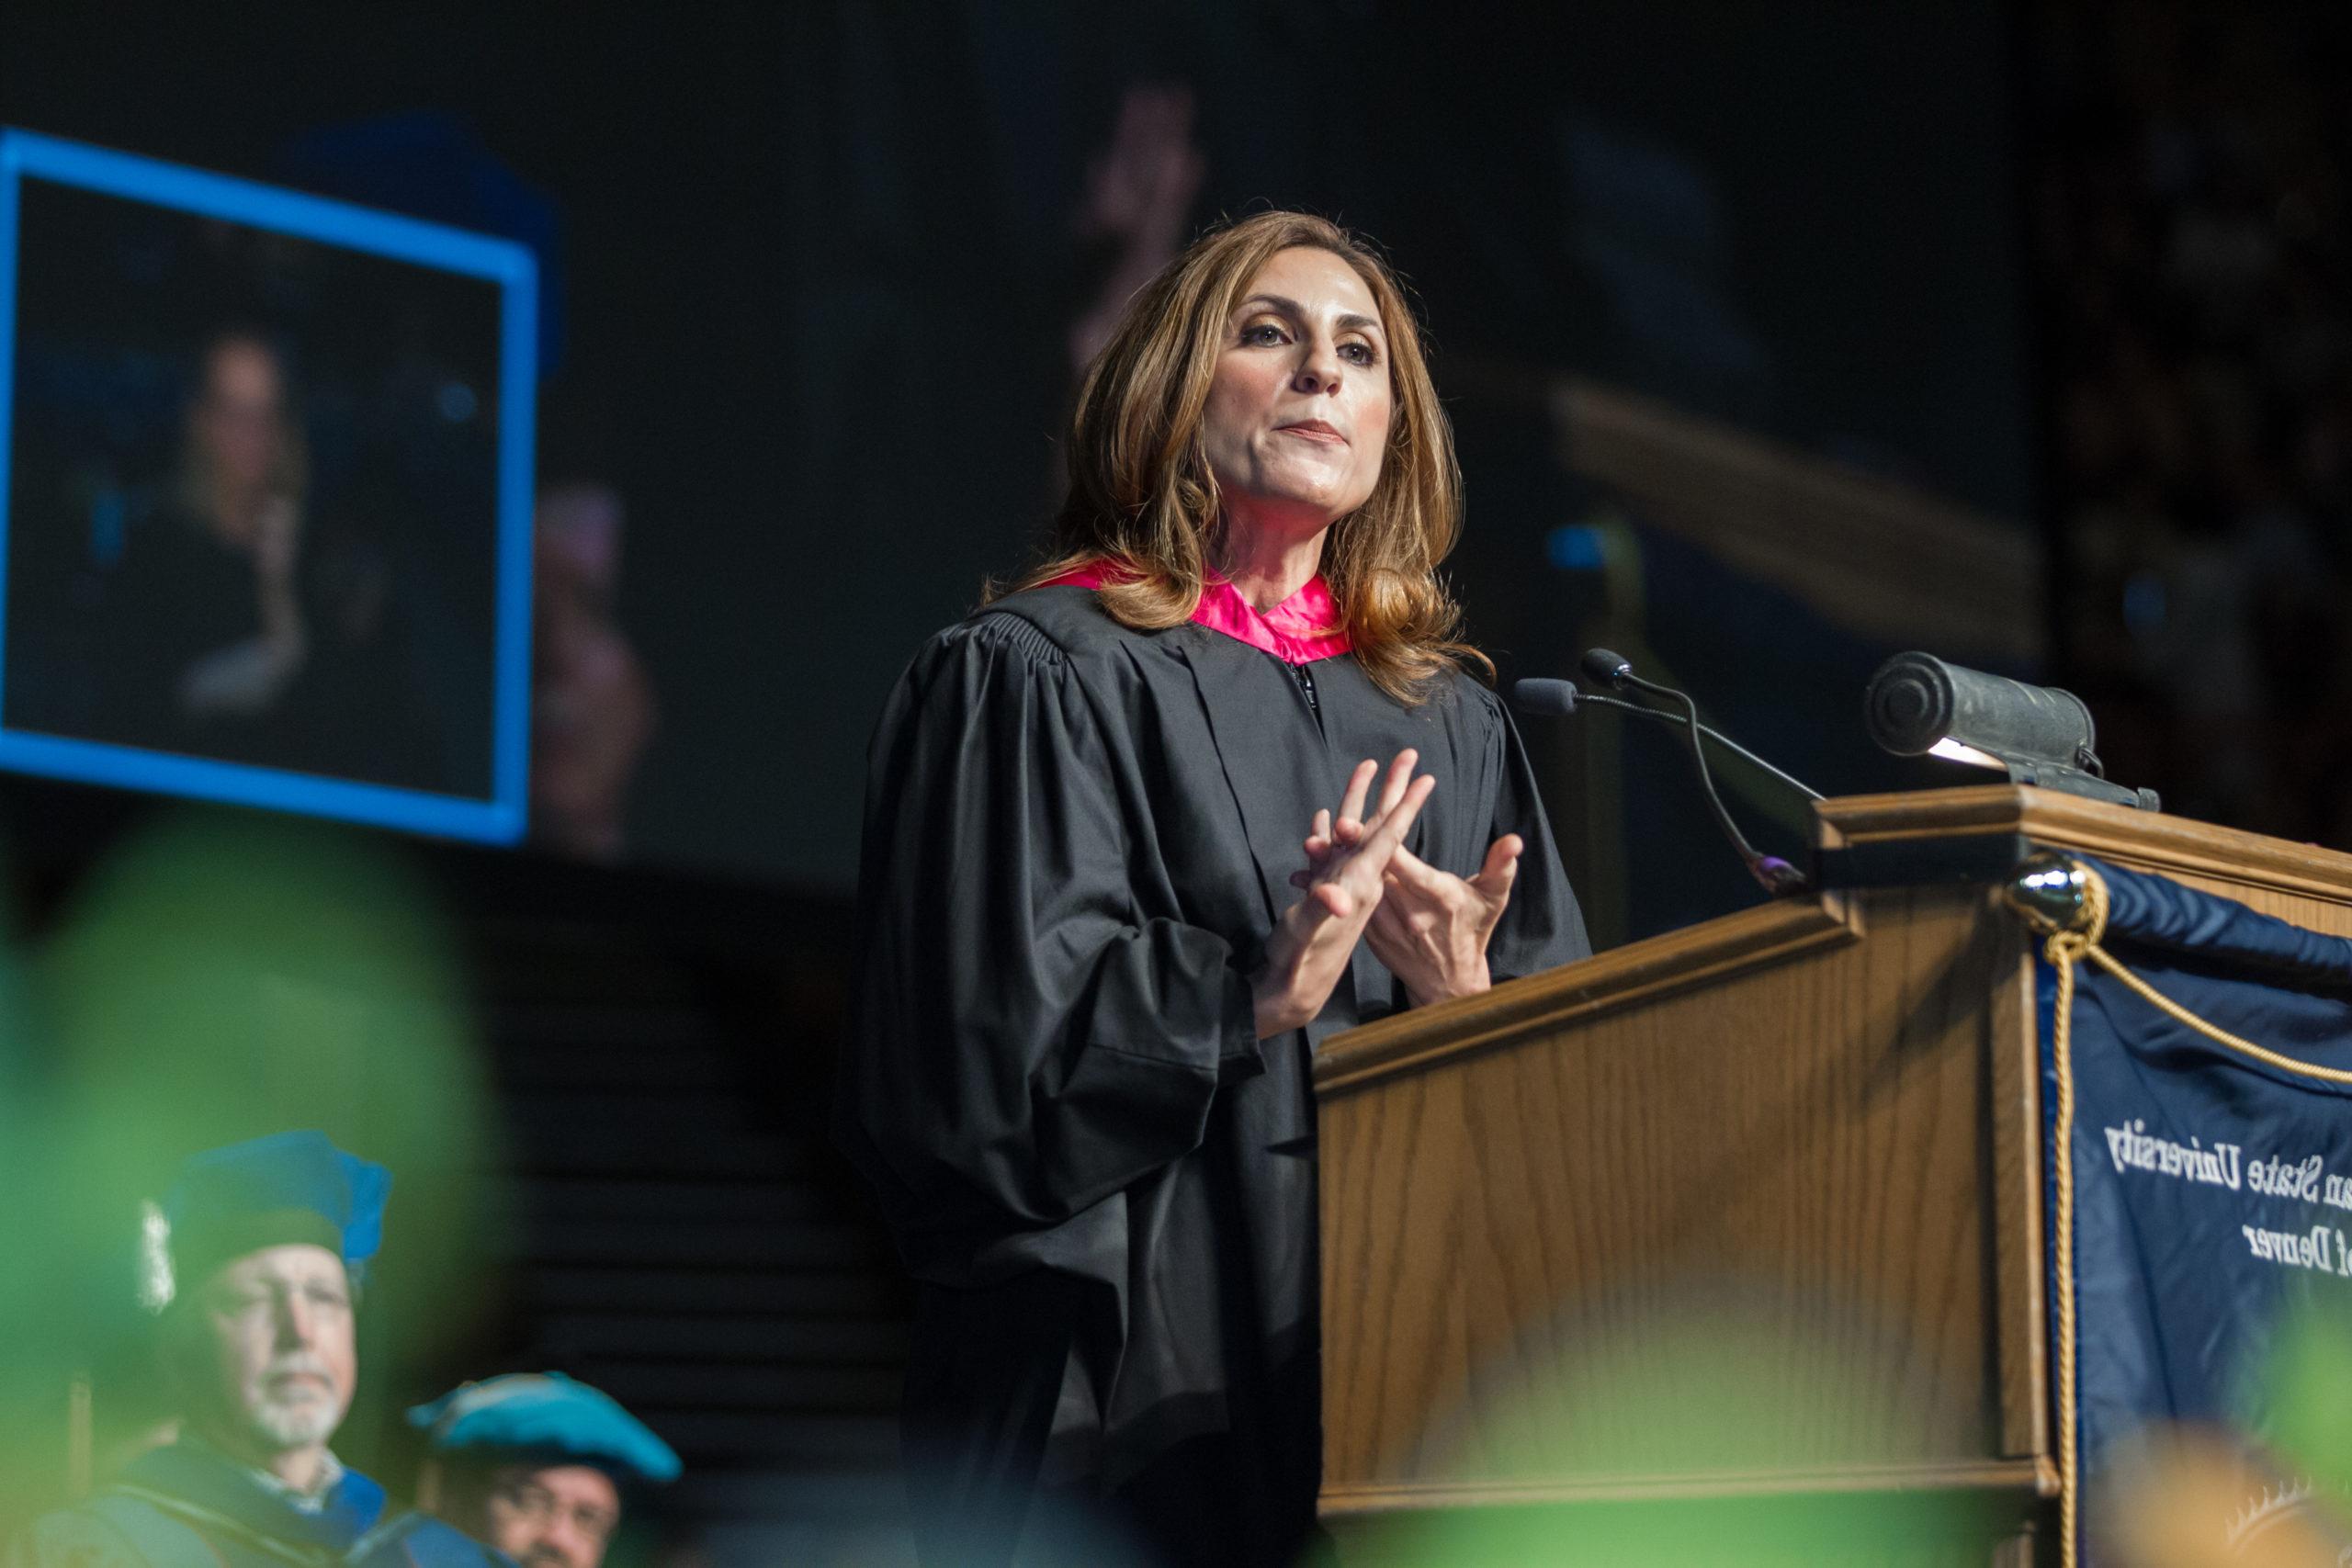 Gayle Tzemach Lemmon speaking at the commencement podium.